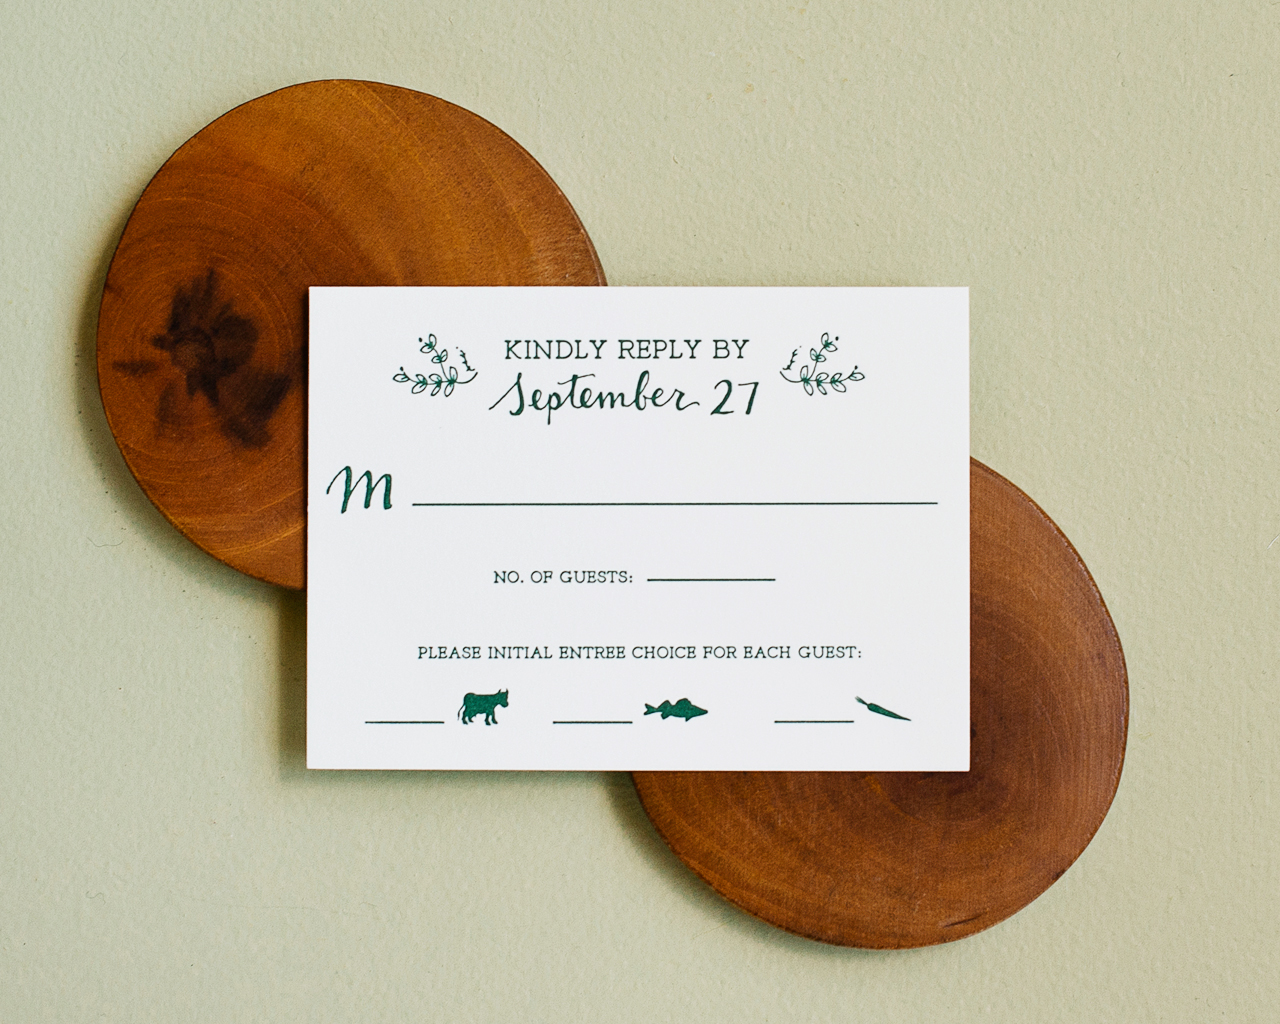 Rustic Green and Gold Foil Wedding Invitations by Printerette Press / Photo Credit: Melissa Oholendt, Styling by Mae Mae & Co.